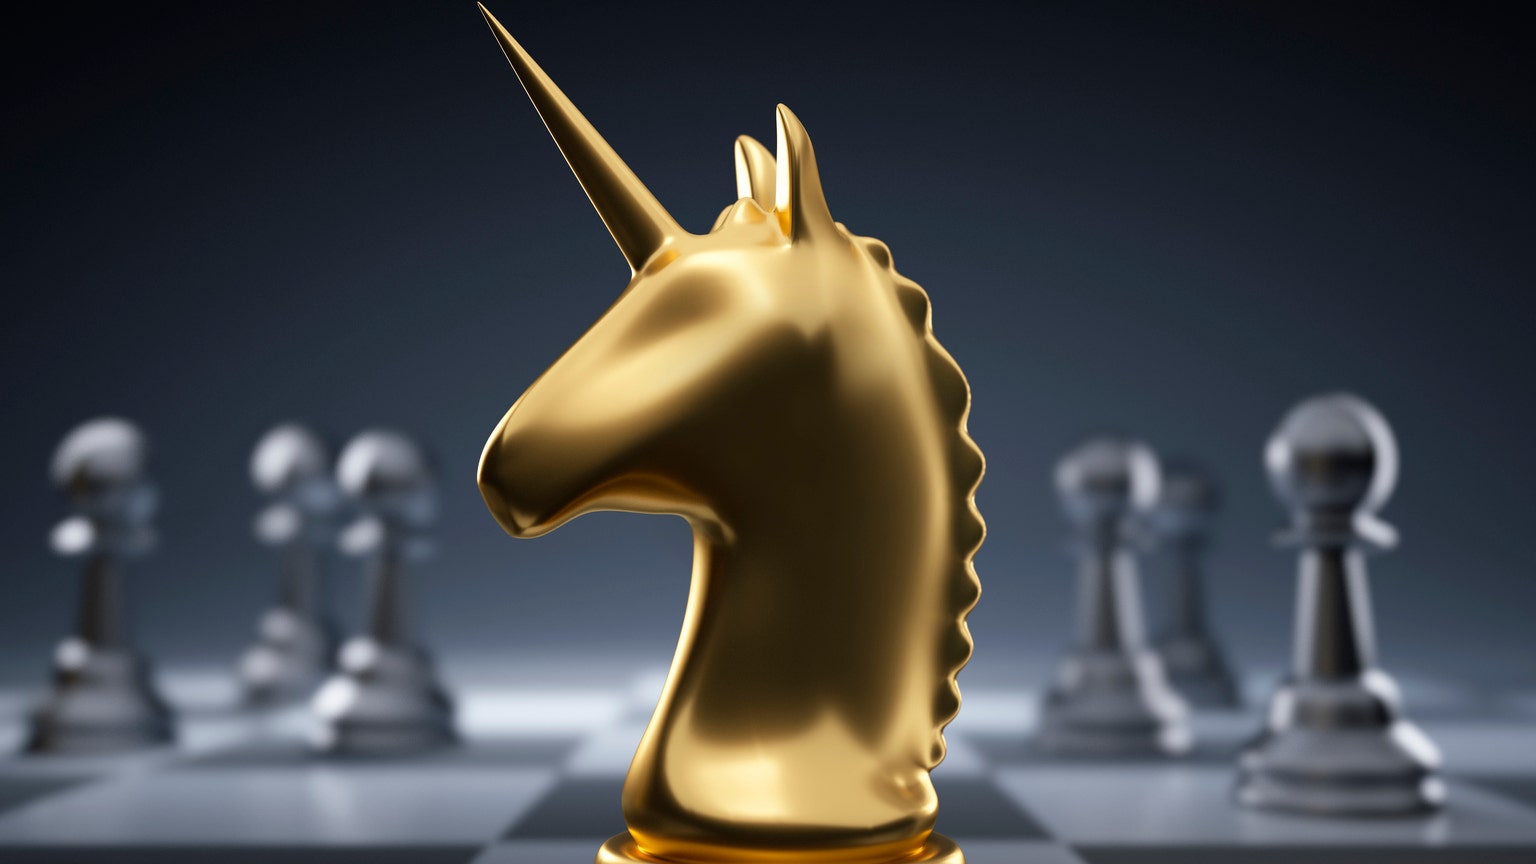 Are 's Rating Percentiles Inflated? - Chess Forums 